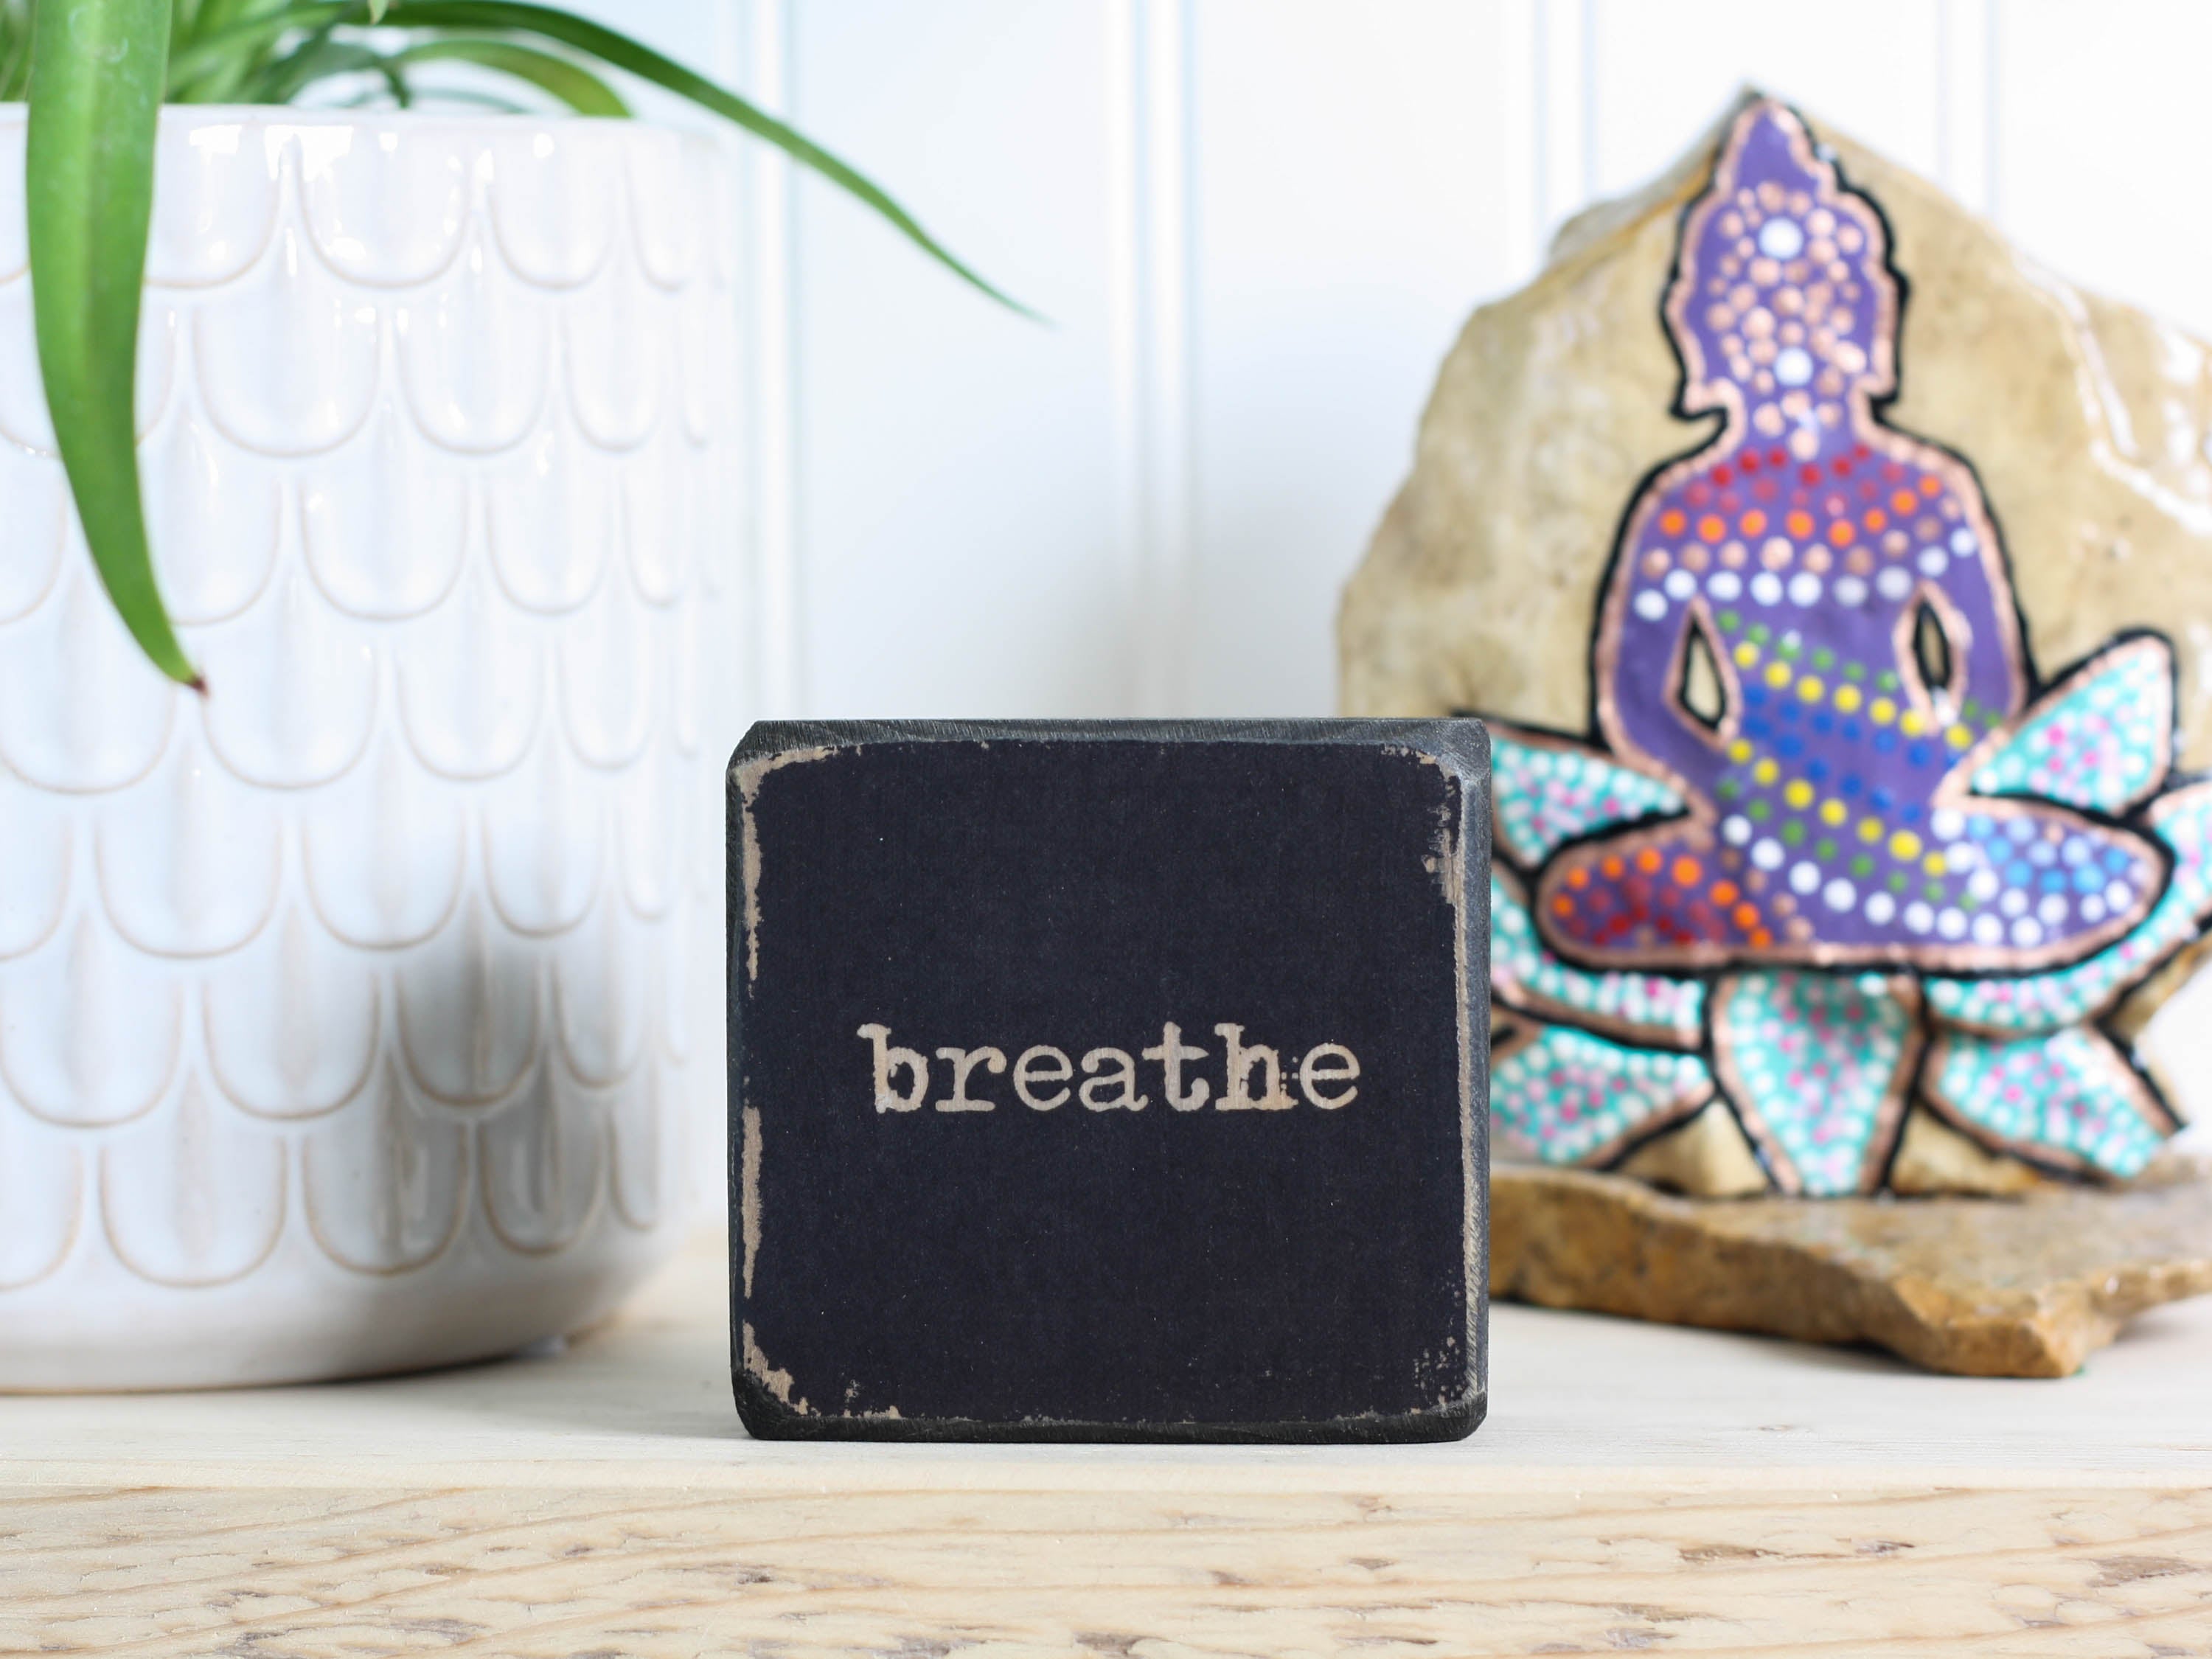 Small wood yoga meditation sign in distressed black with the word "Breathe".